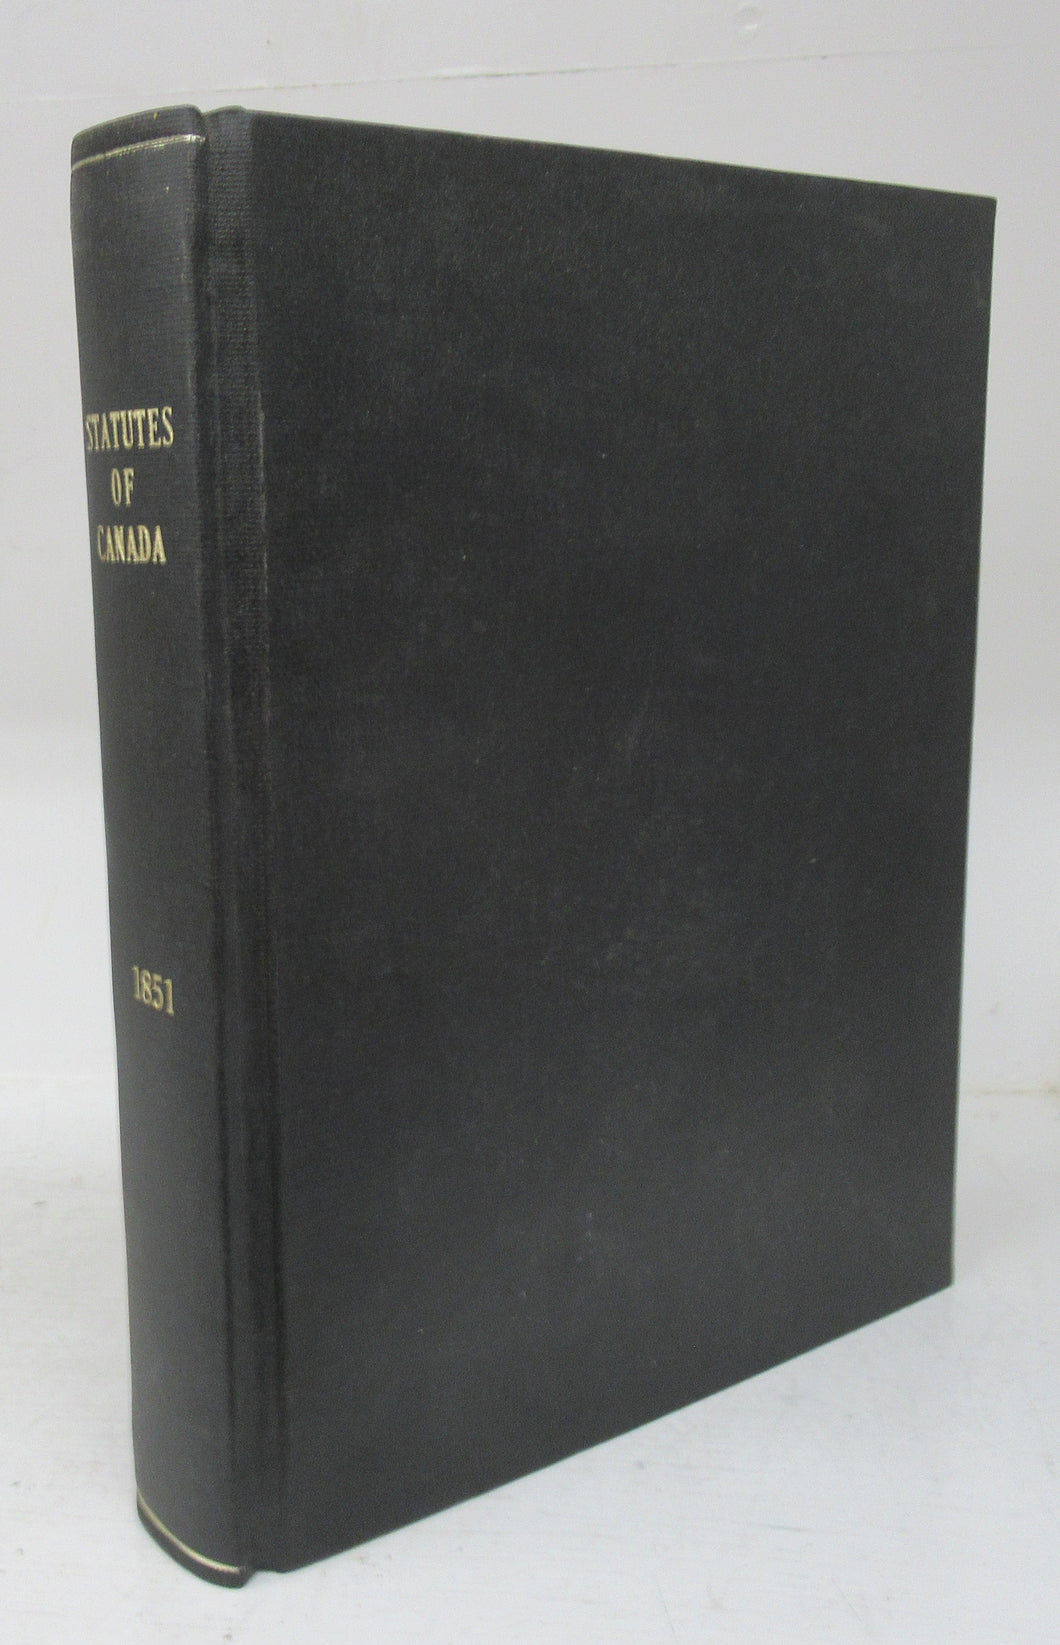 Provincial Statutes of Canada. Vol. III only (1851)